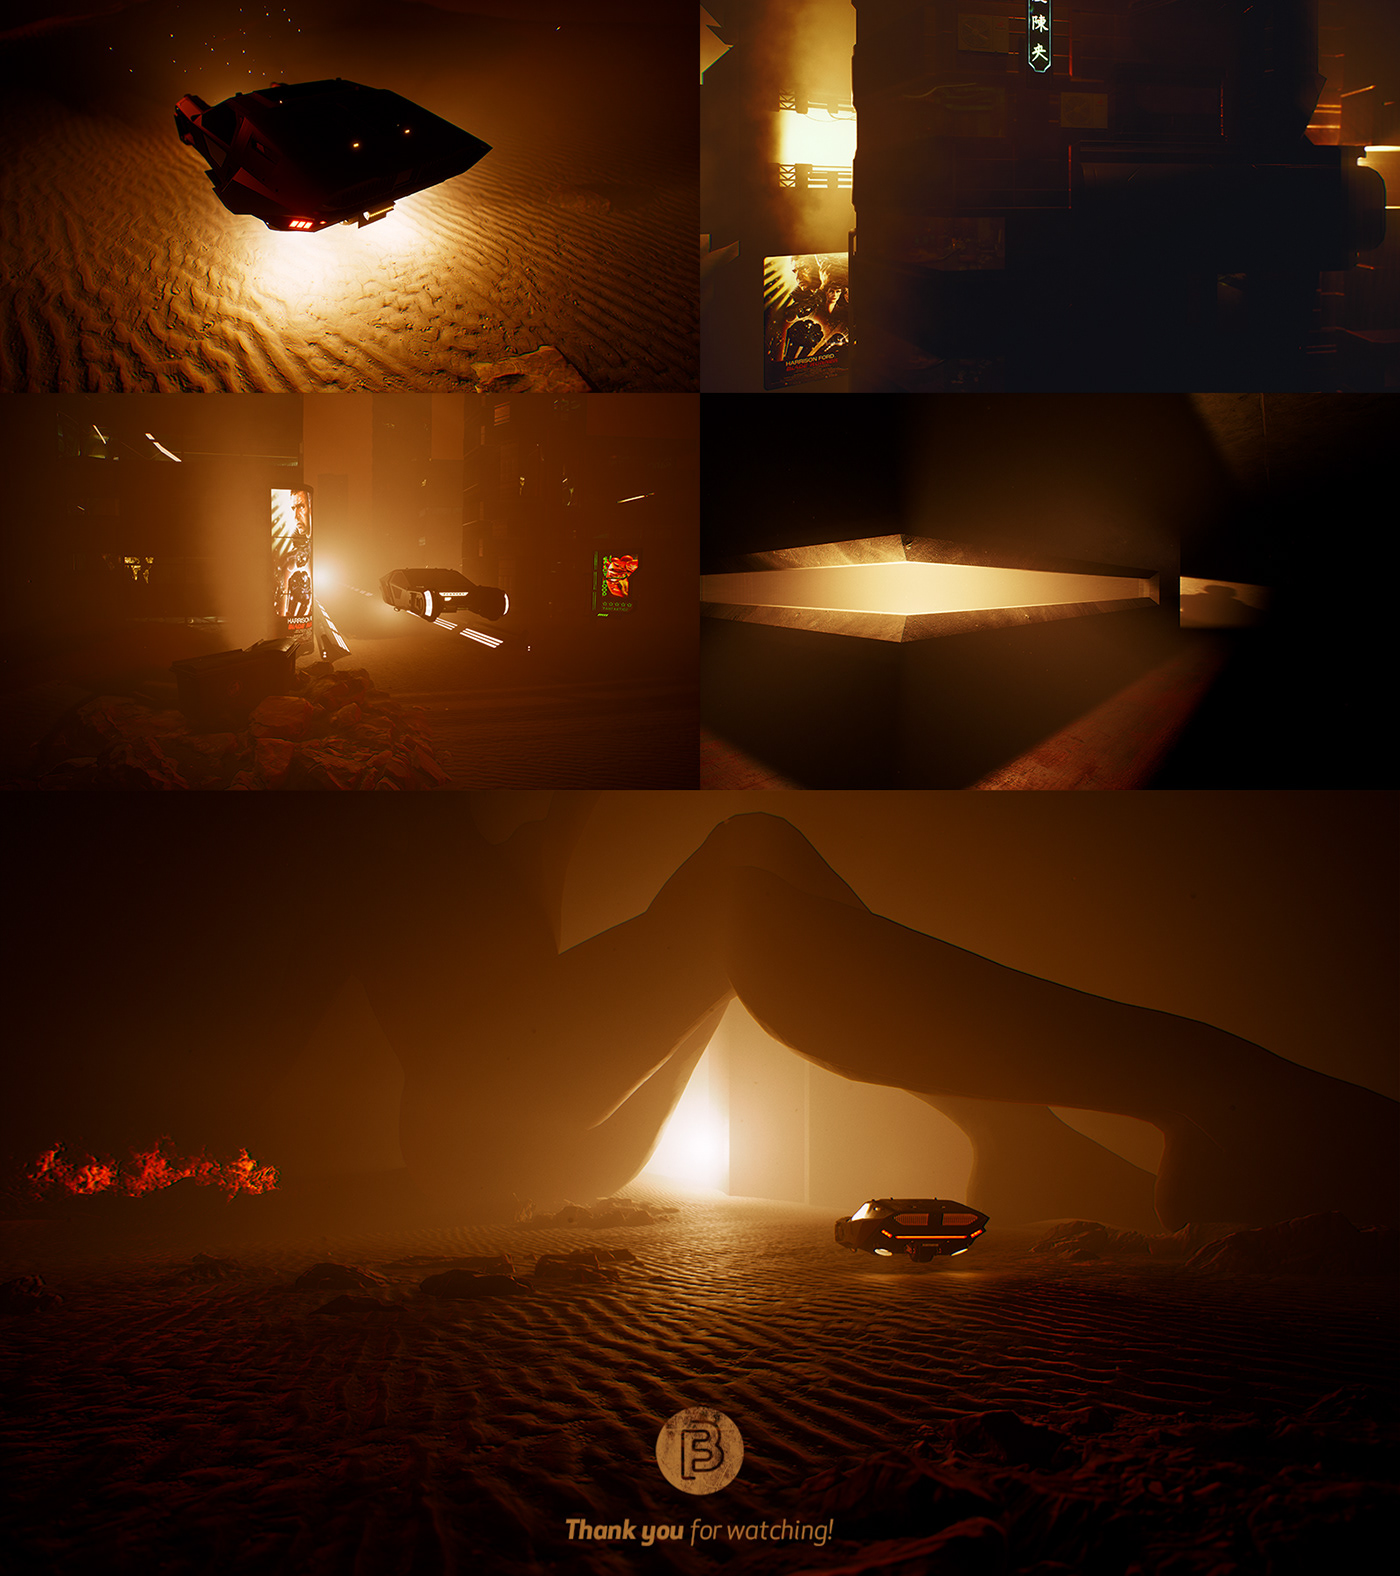 Bladerunner opening titles title sequence Unreal Engine